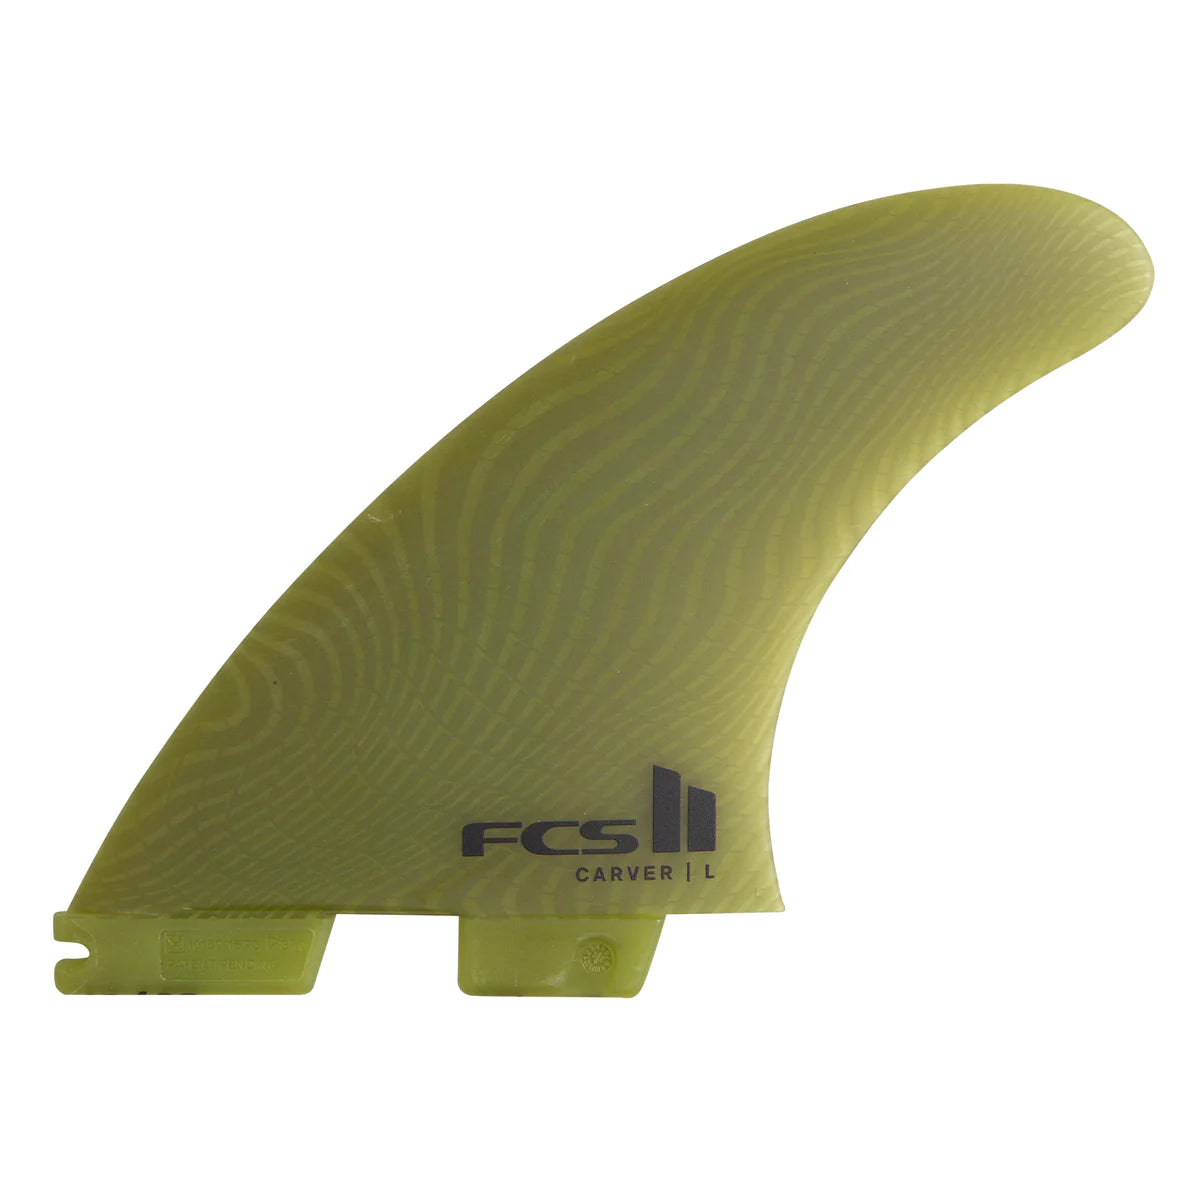 FCS Japan: Surfboard Fins, Covers, Traction, Leashes, Surf Accessories